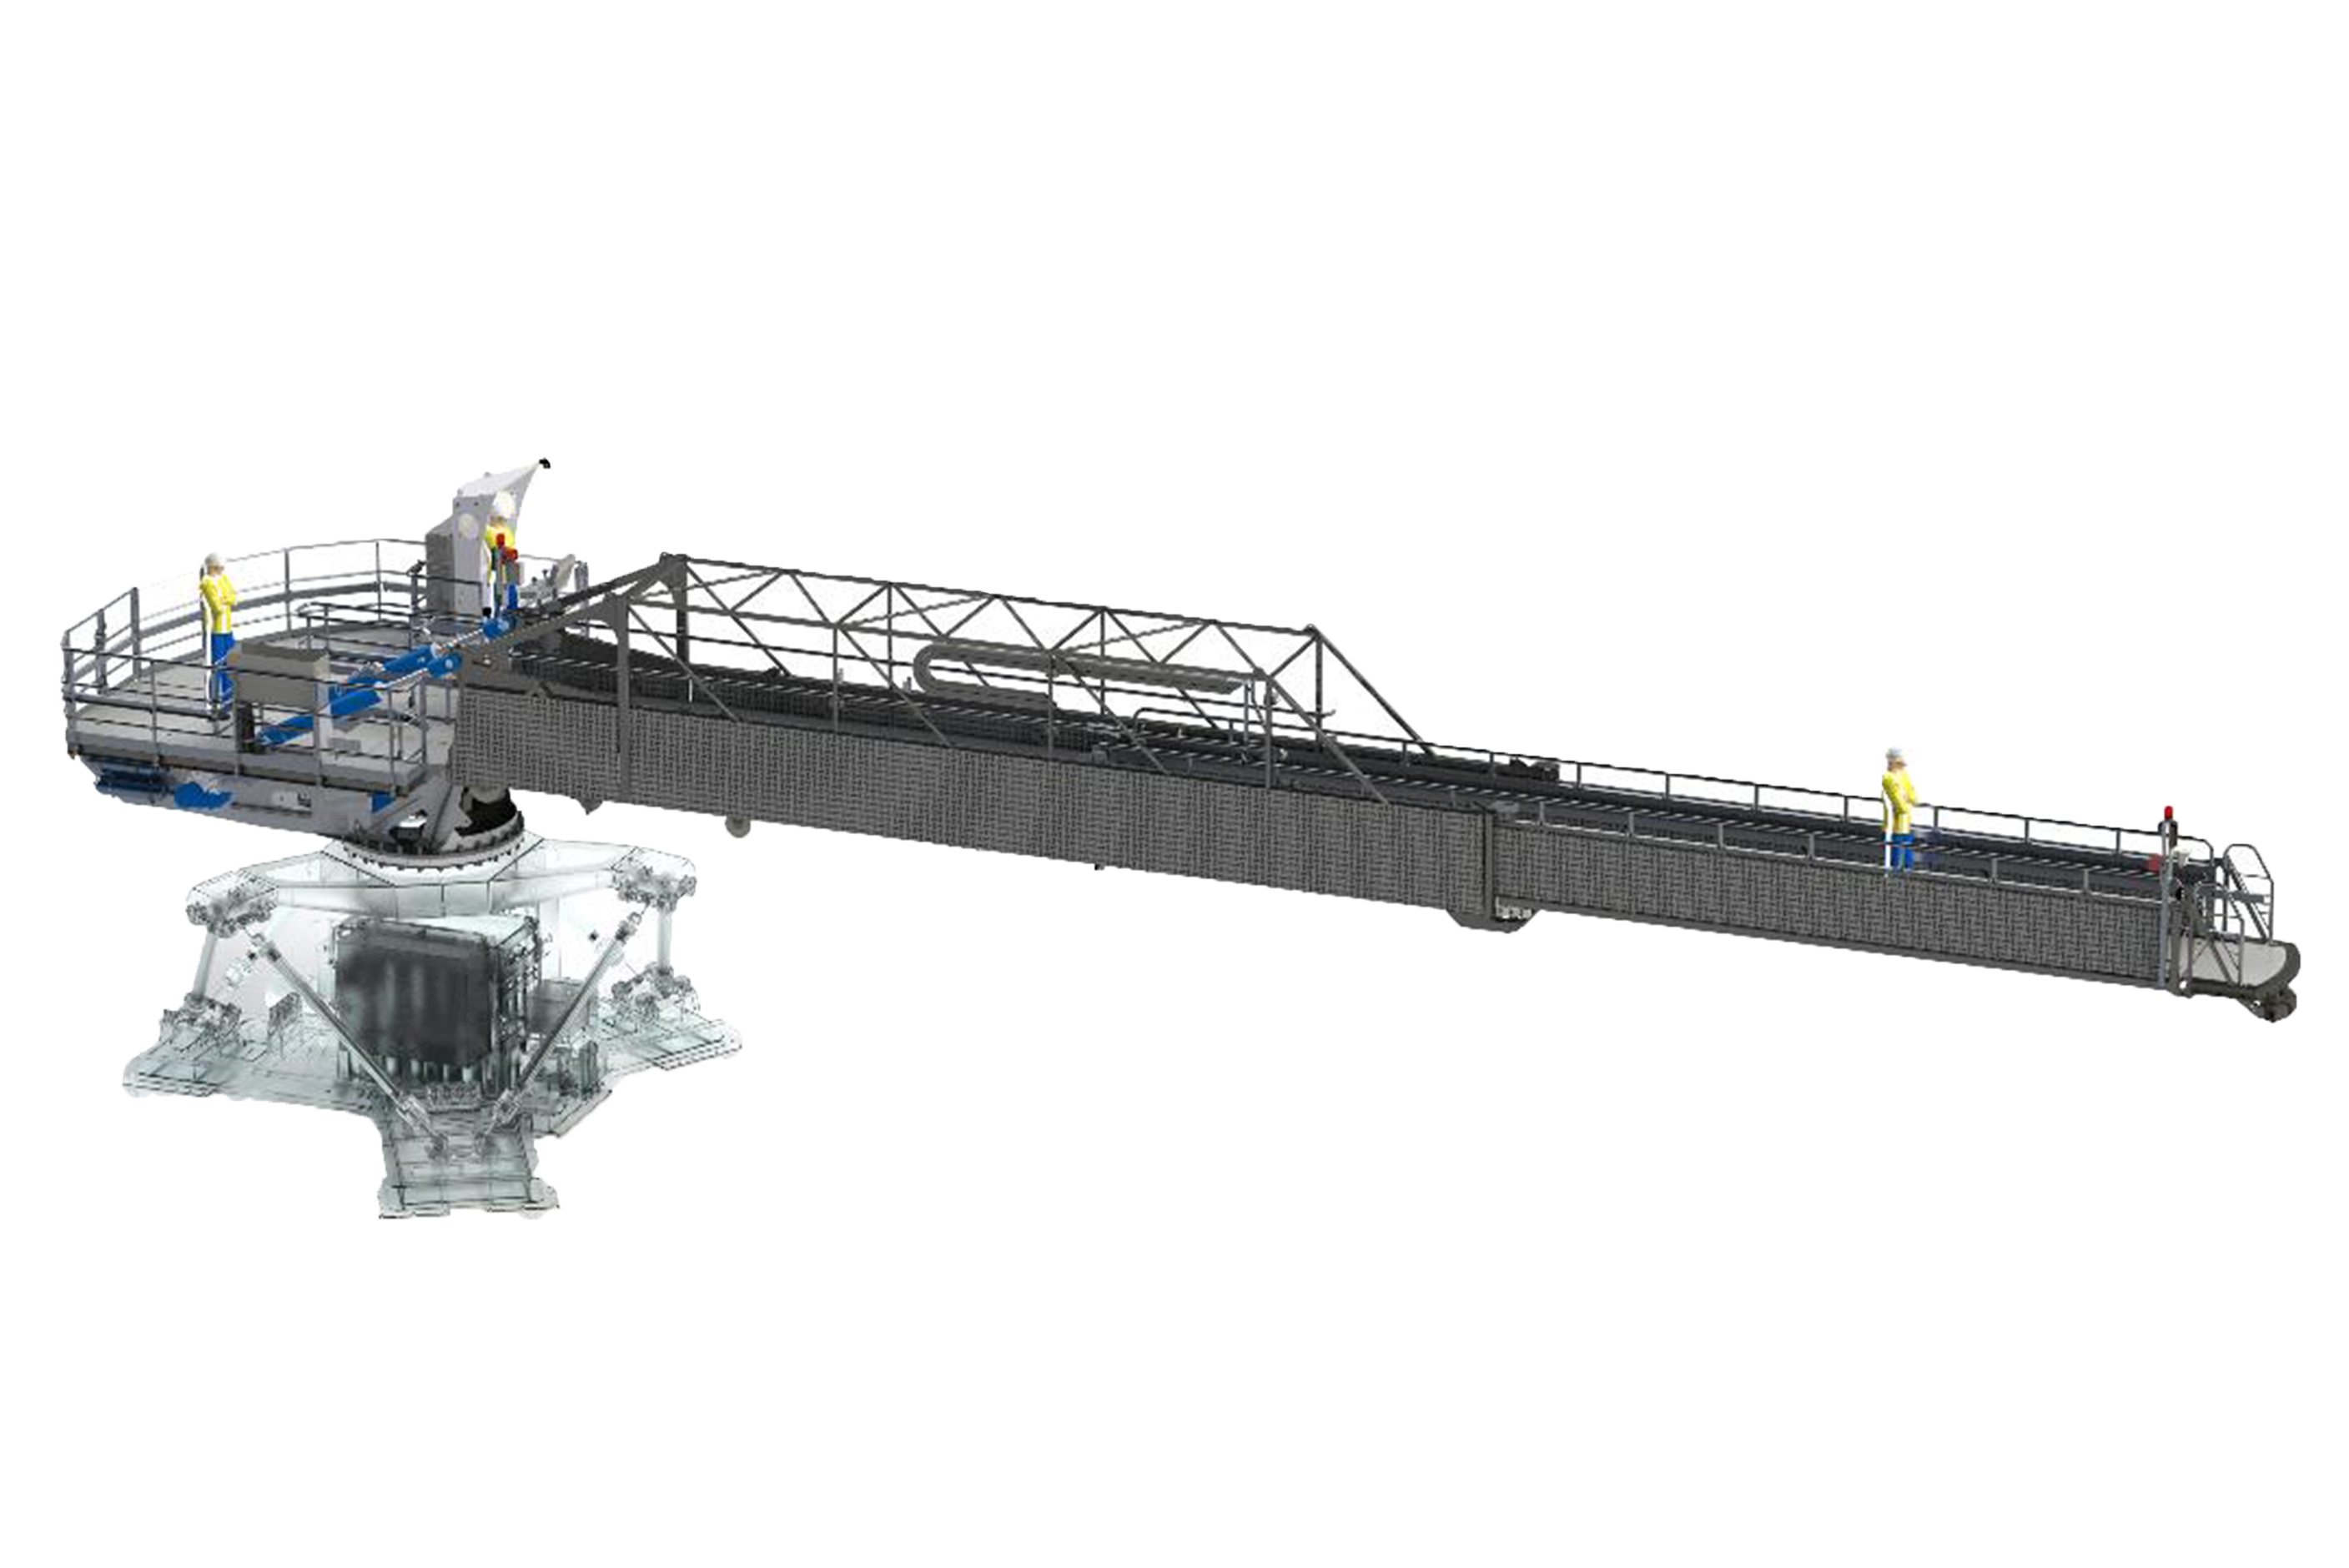 Render motion compensated gangway without banners with hydraulic cylinders and platform